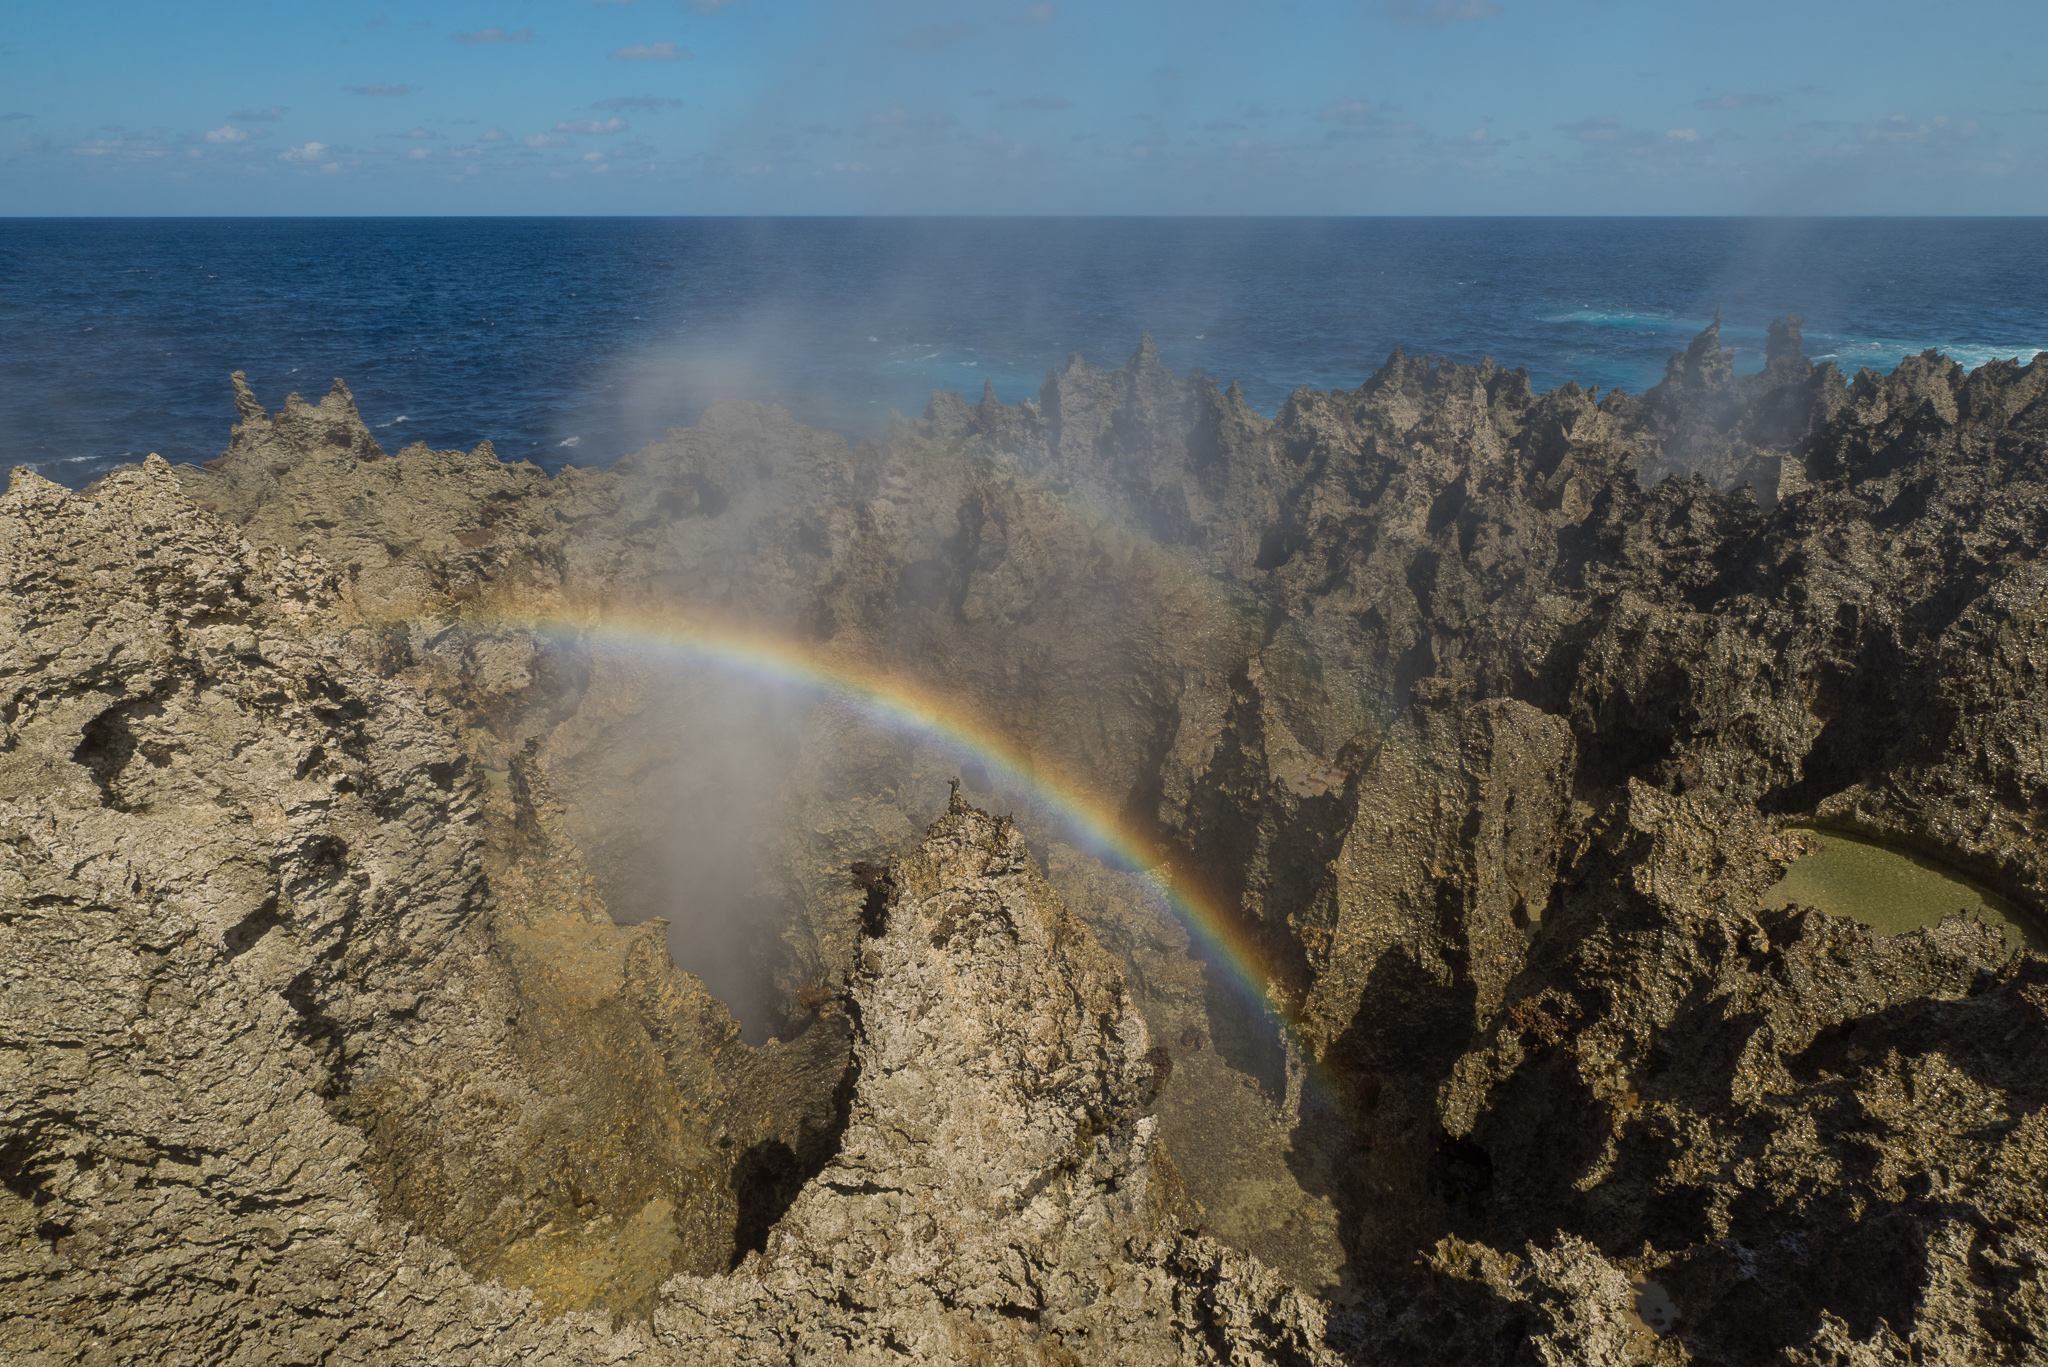 The Blow Holes - Rainbows form in the mist coming out of the holes when sunlight is available